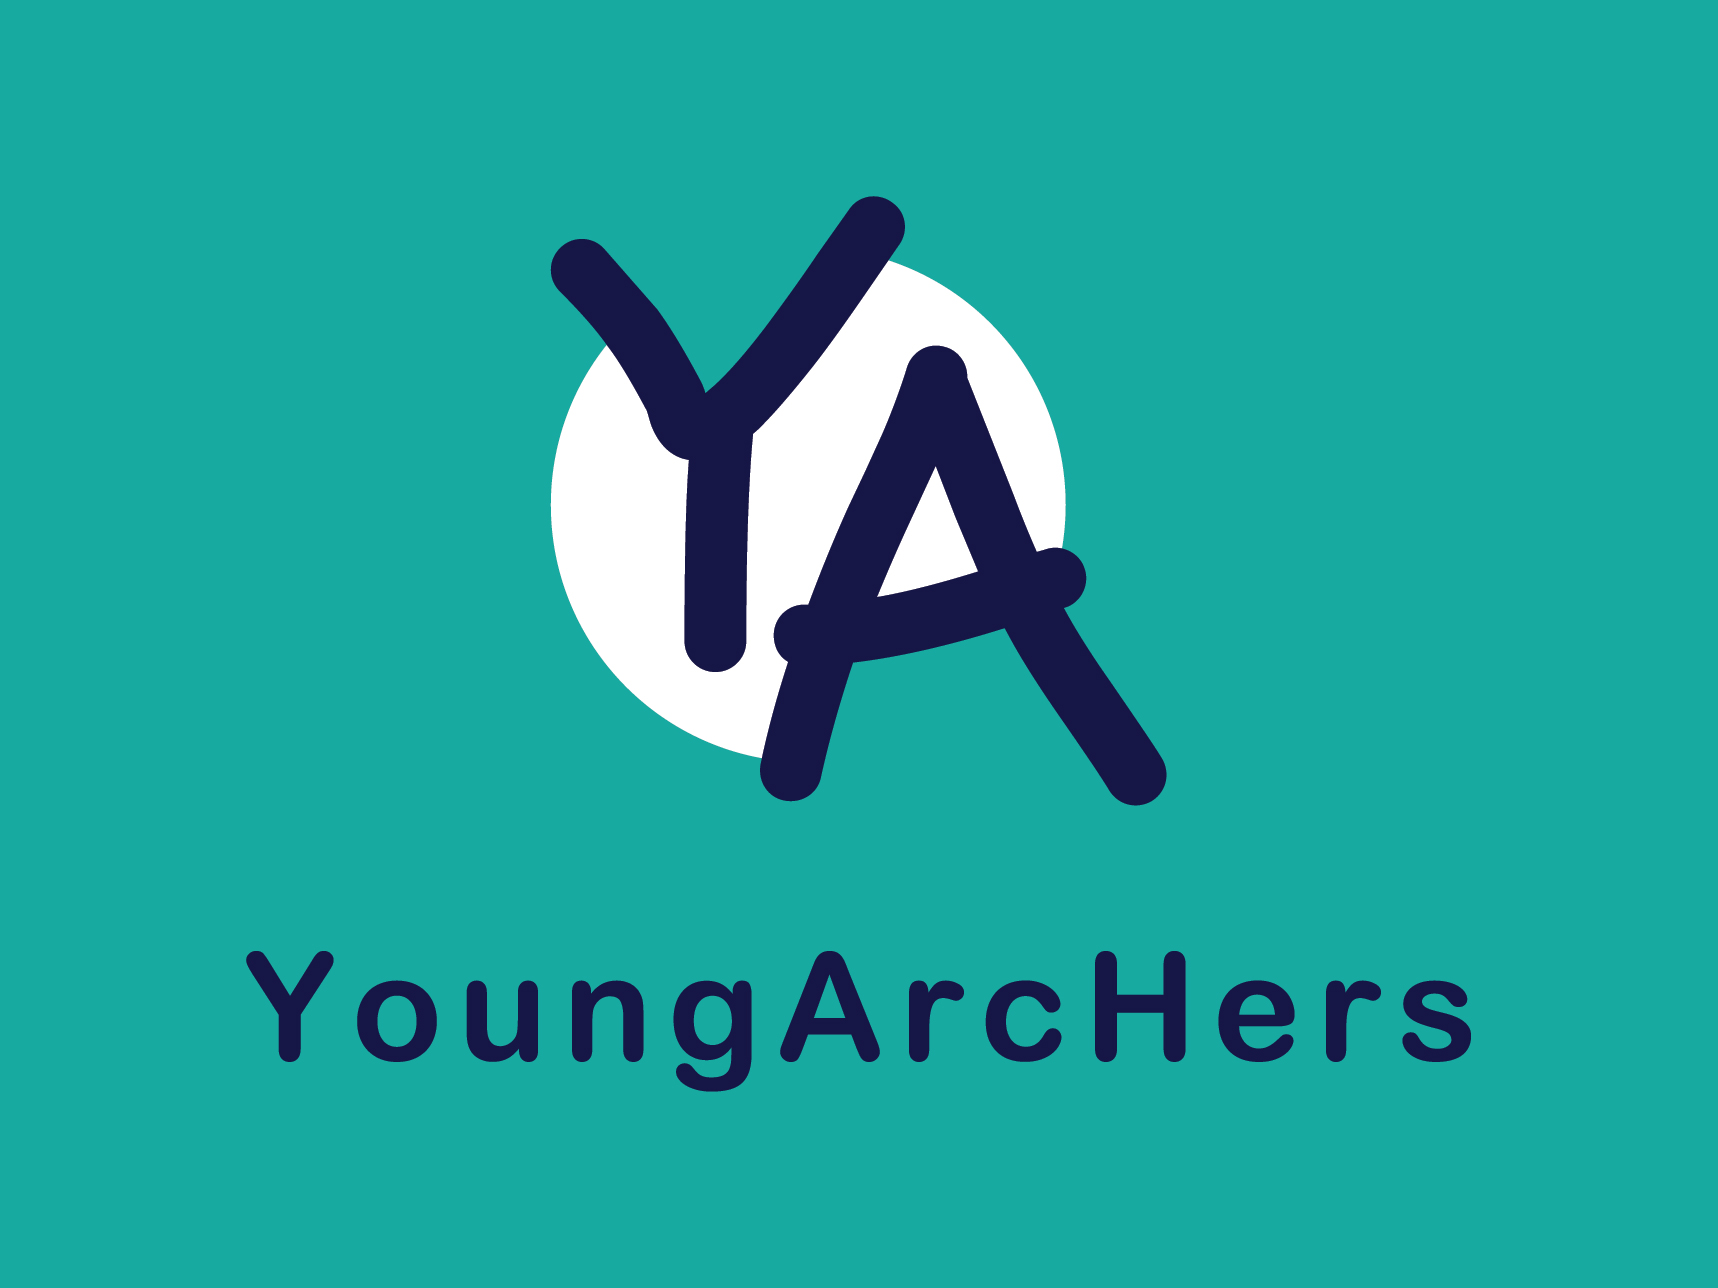 Program Young ΑrcΗers